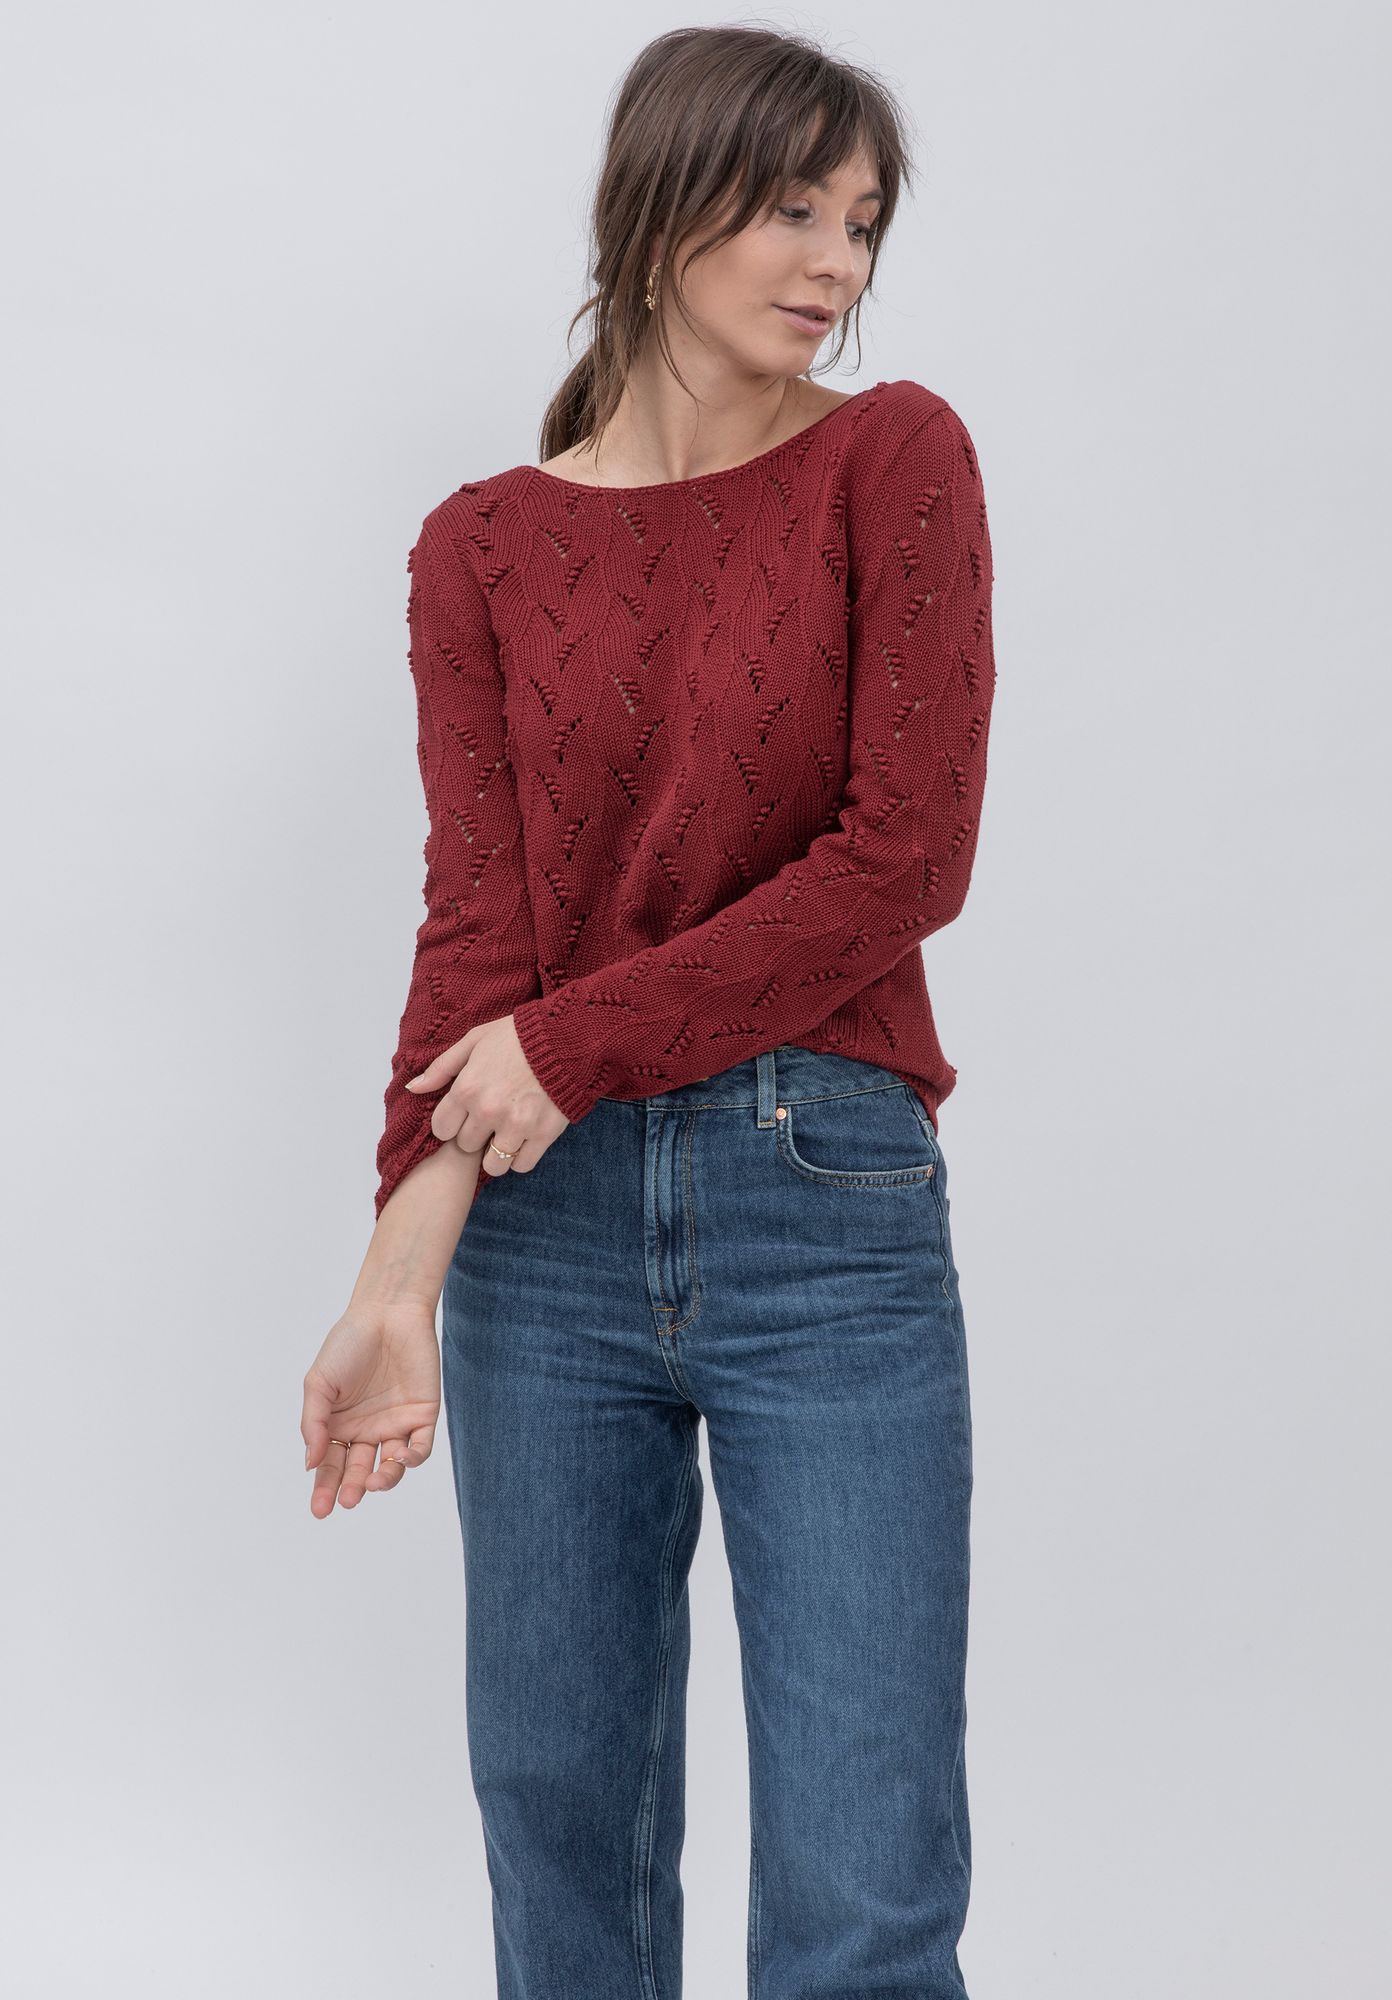 Knitted sweater IDENOR in wine red by LOVJOI made of organic cotton (ST)